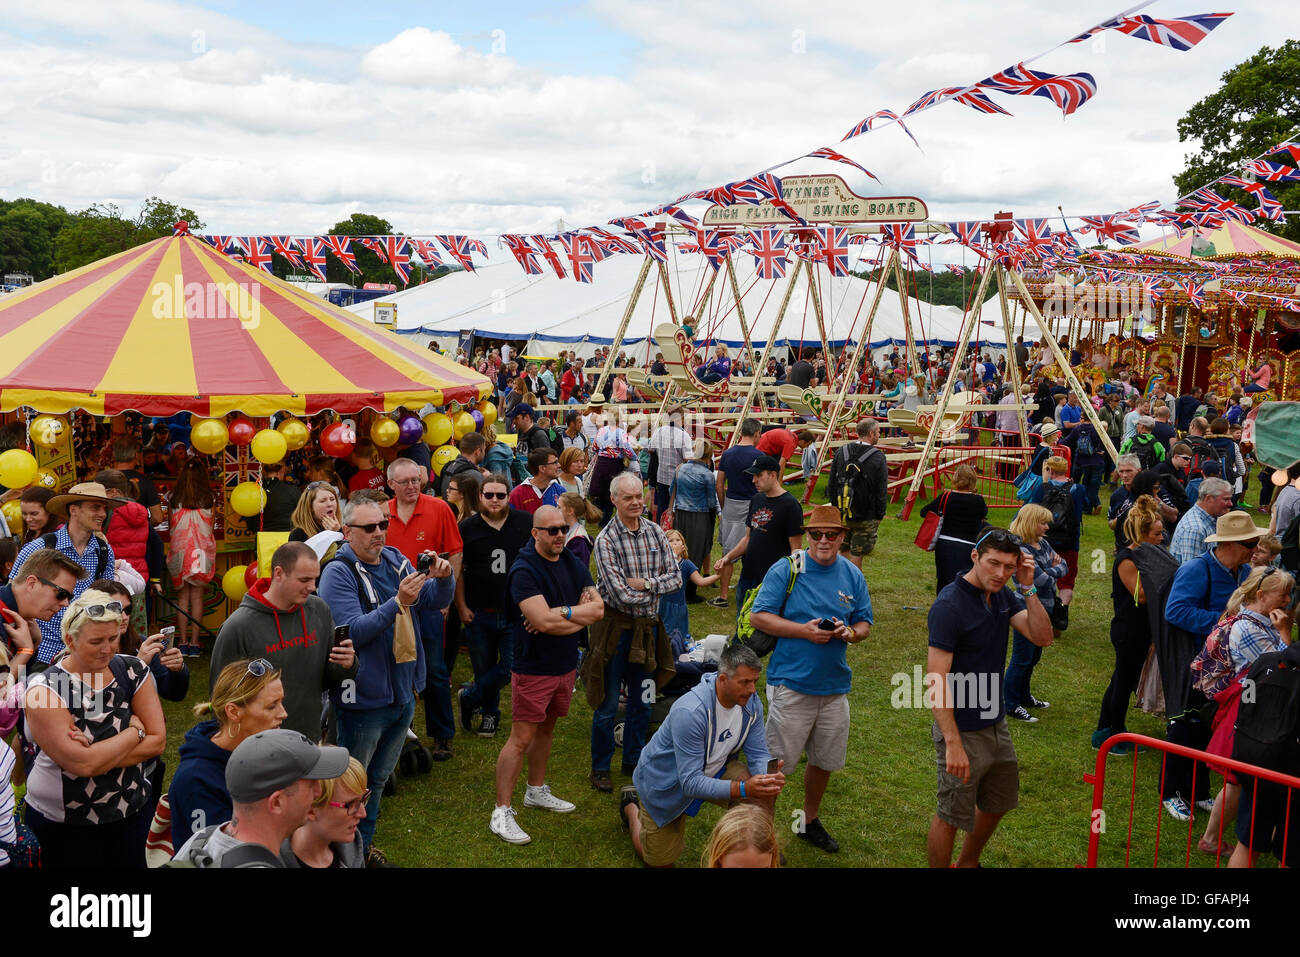 Carfest North, Bolesworth, Cheshire, UK. 30th July 2016. The fairground area of the festival. The event is the brainchild of Chris Evans and features 3 days of cars, music and entertainment with profits being donated to the charity Children in Need. Andrew Paterson/Alamy Live News Stock Photo